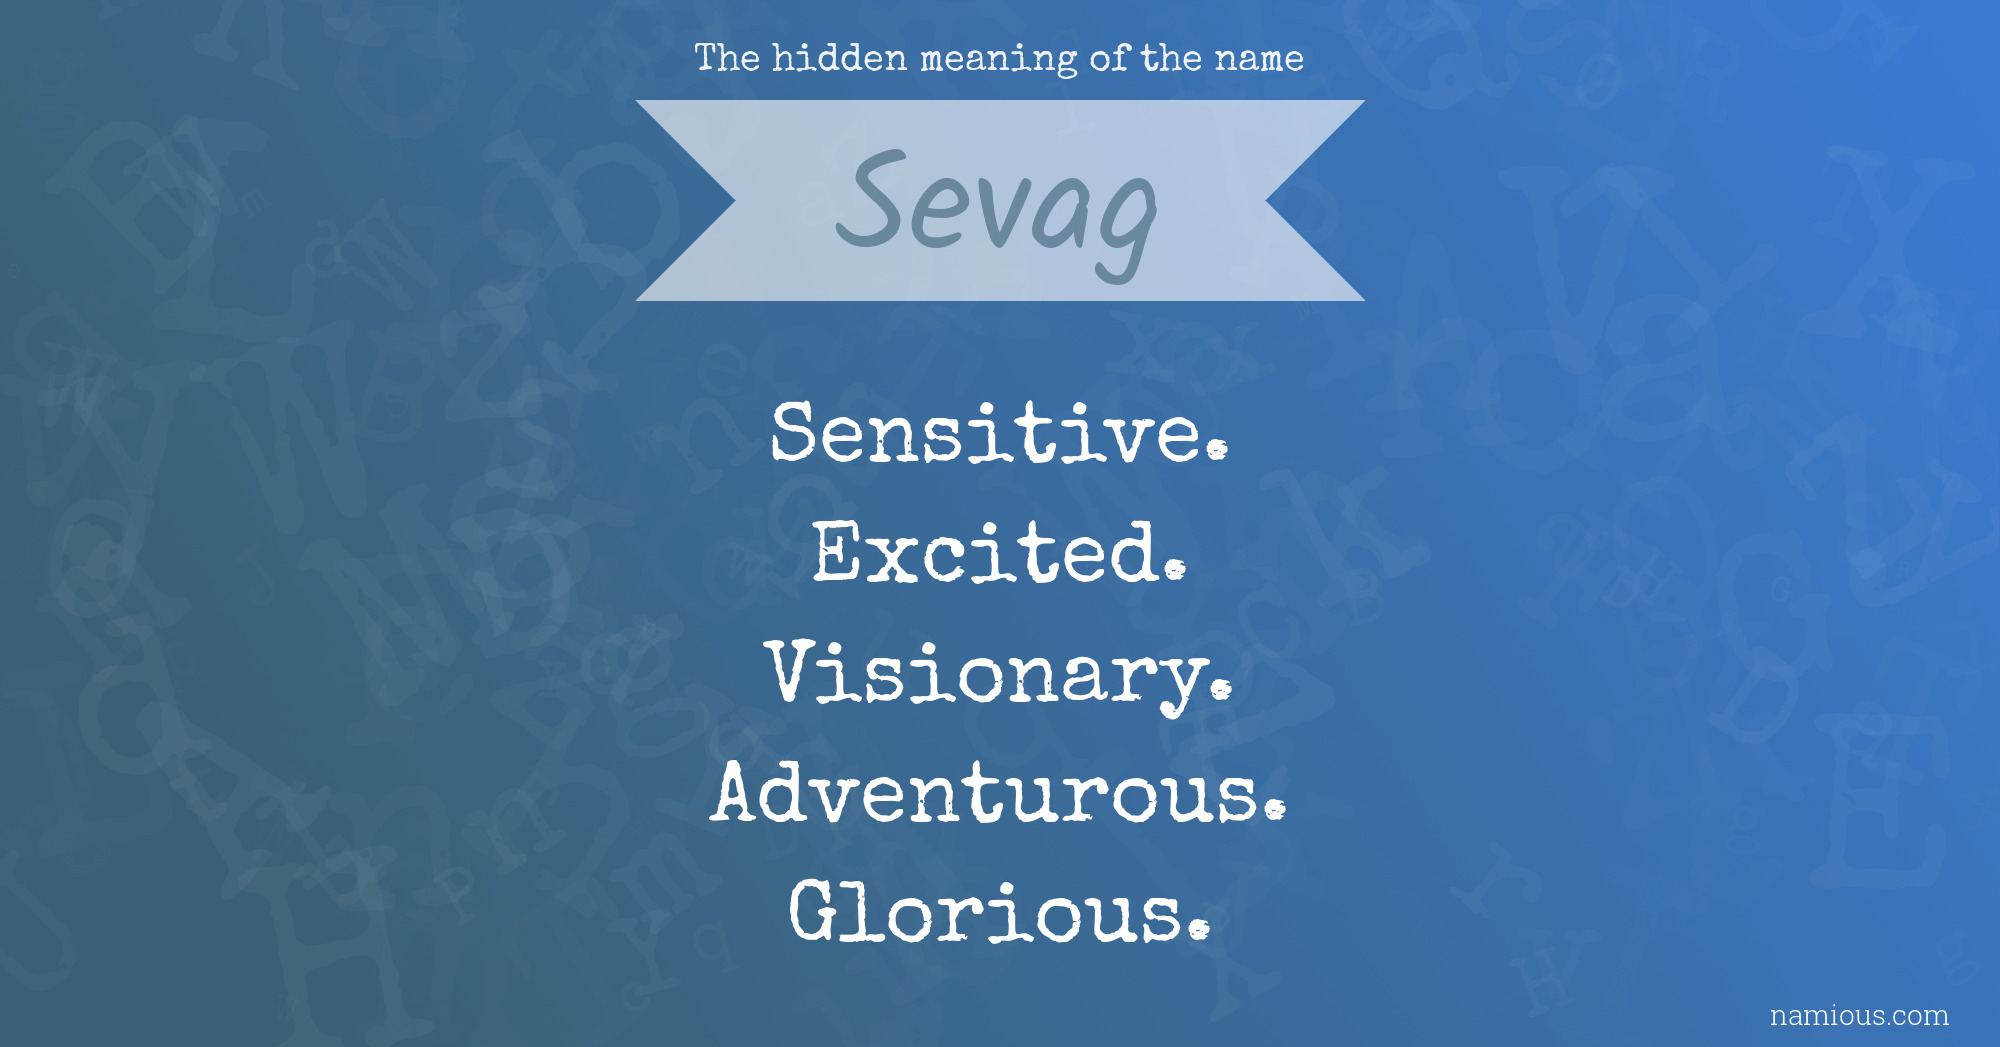 The hidden meaning of the name Sevag